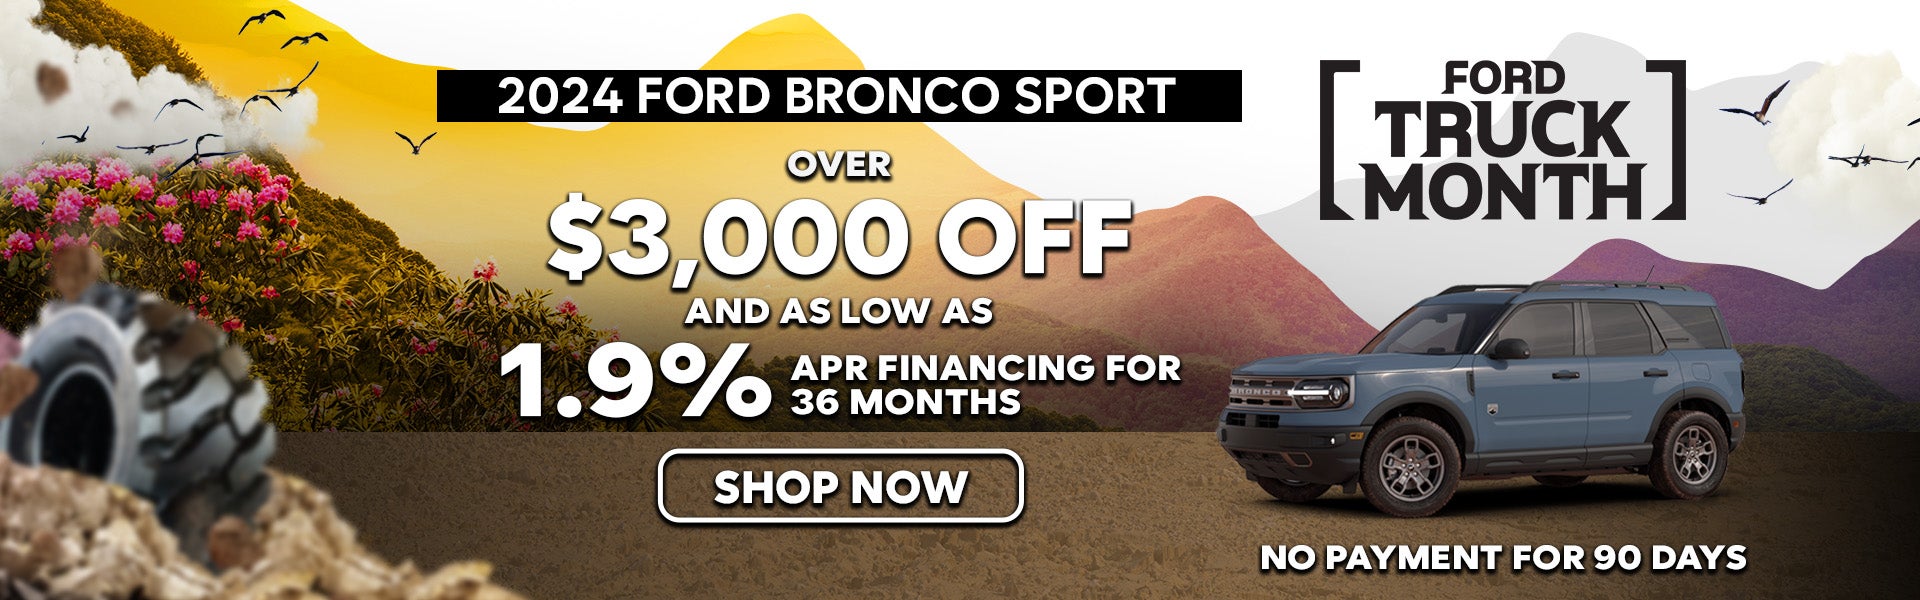 2024 Ford Bronco Sport Special Offer